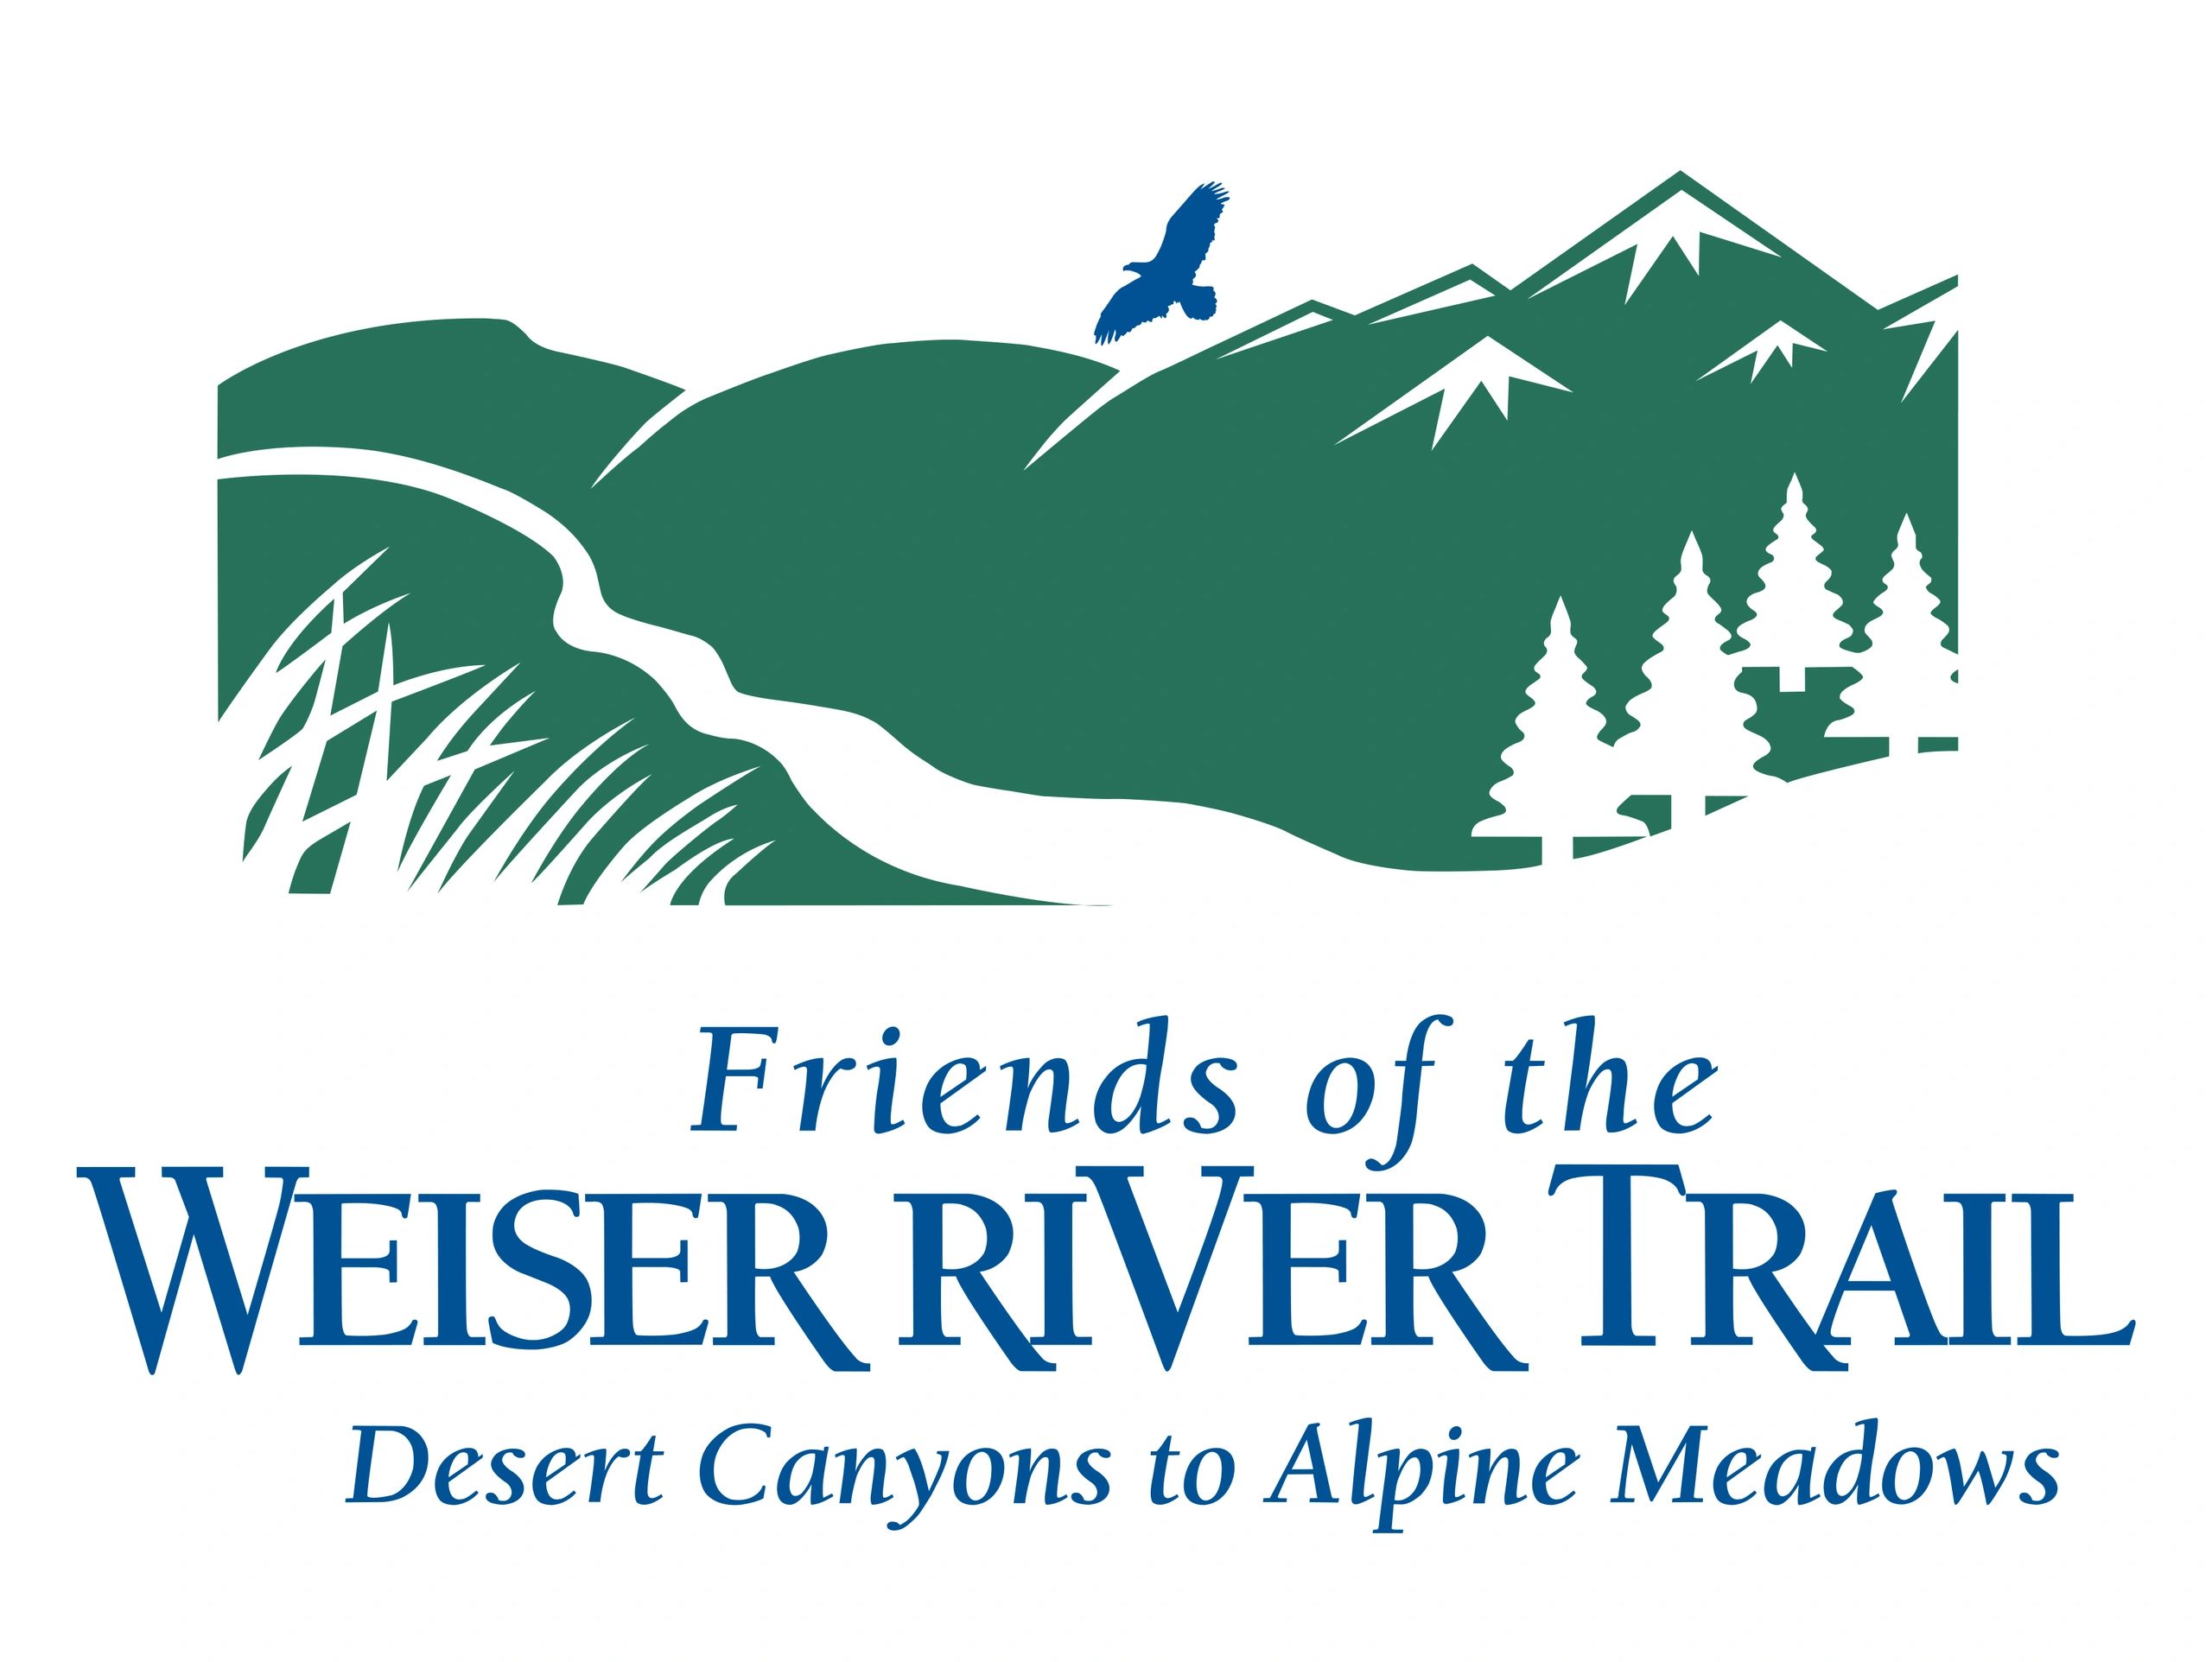 Weiser river trail logo, "desert canyons to alpine meadows"